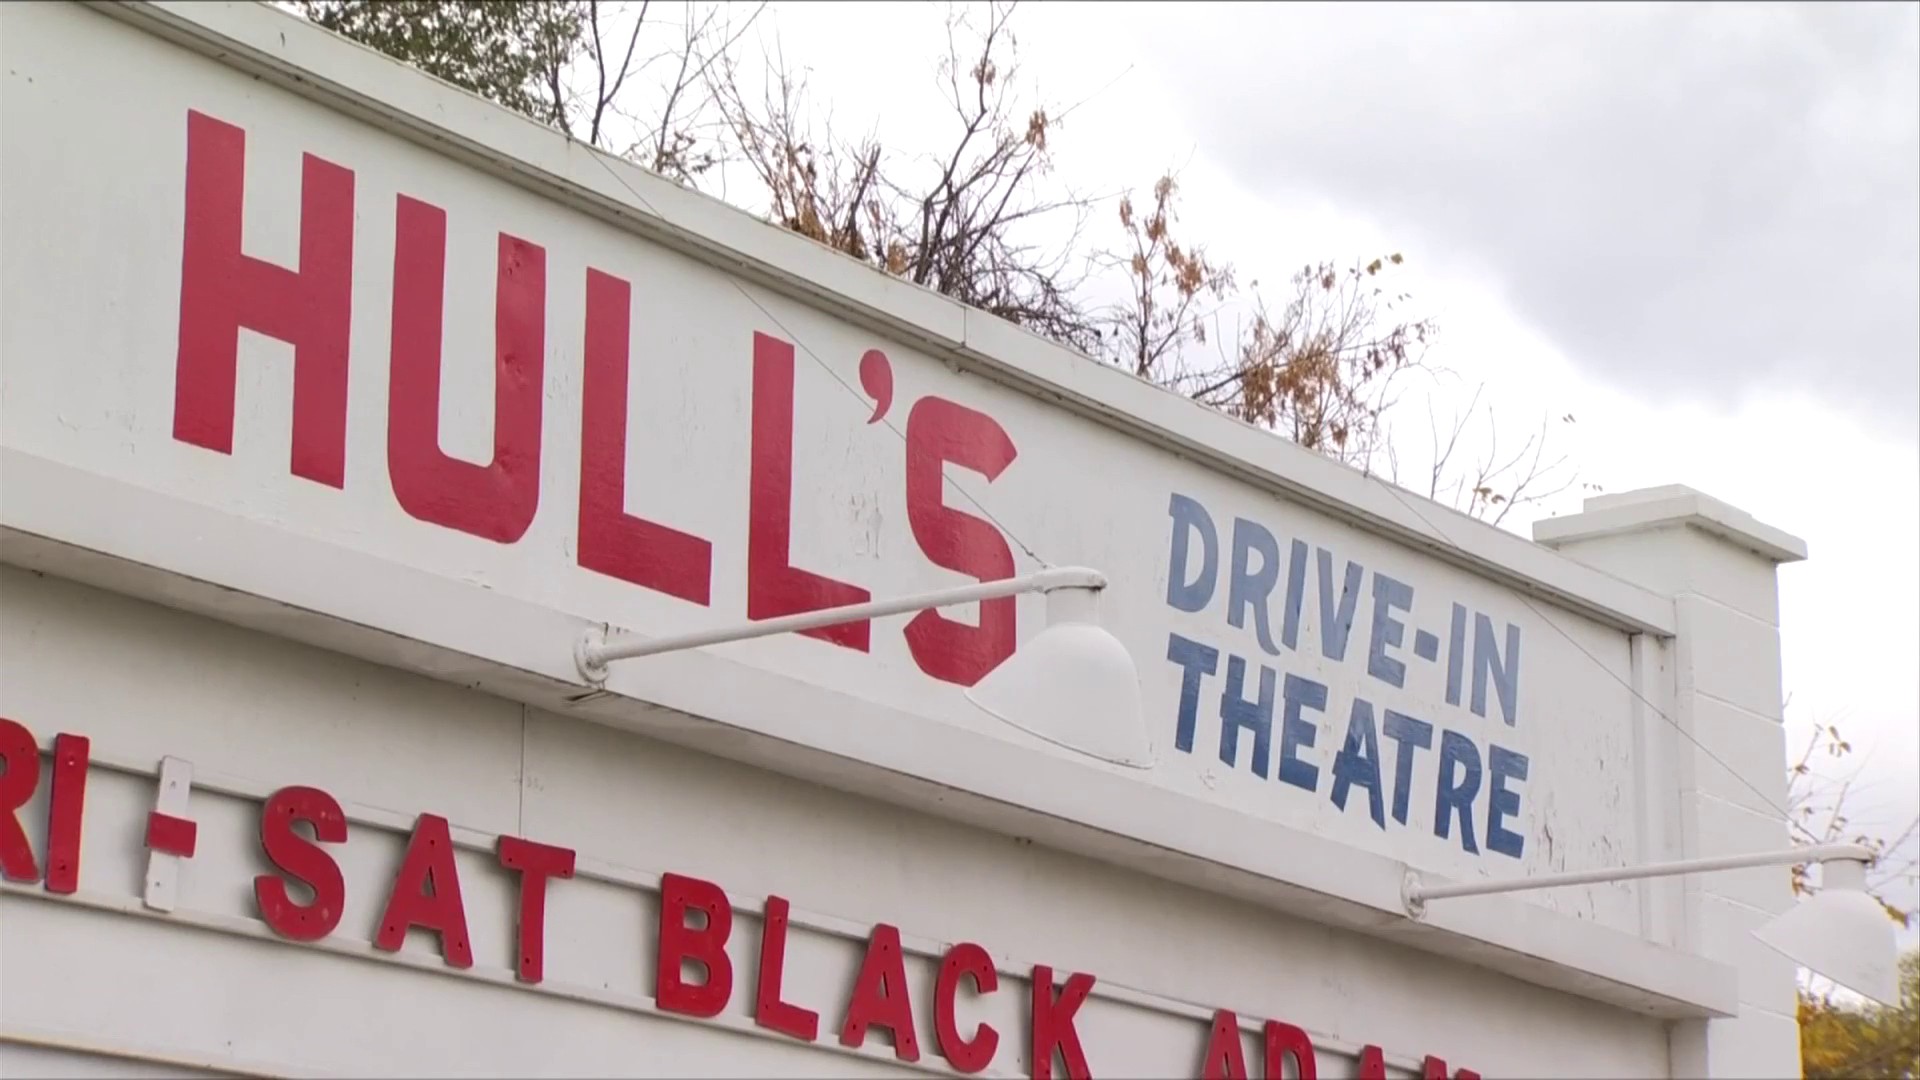 NOW-PLAYING - Hull's Drive-In